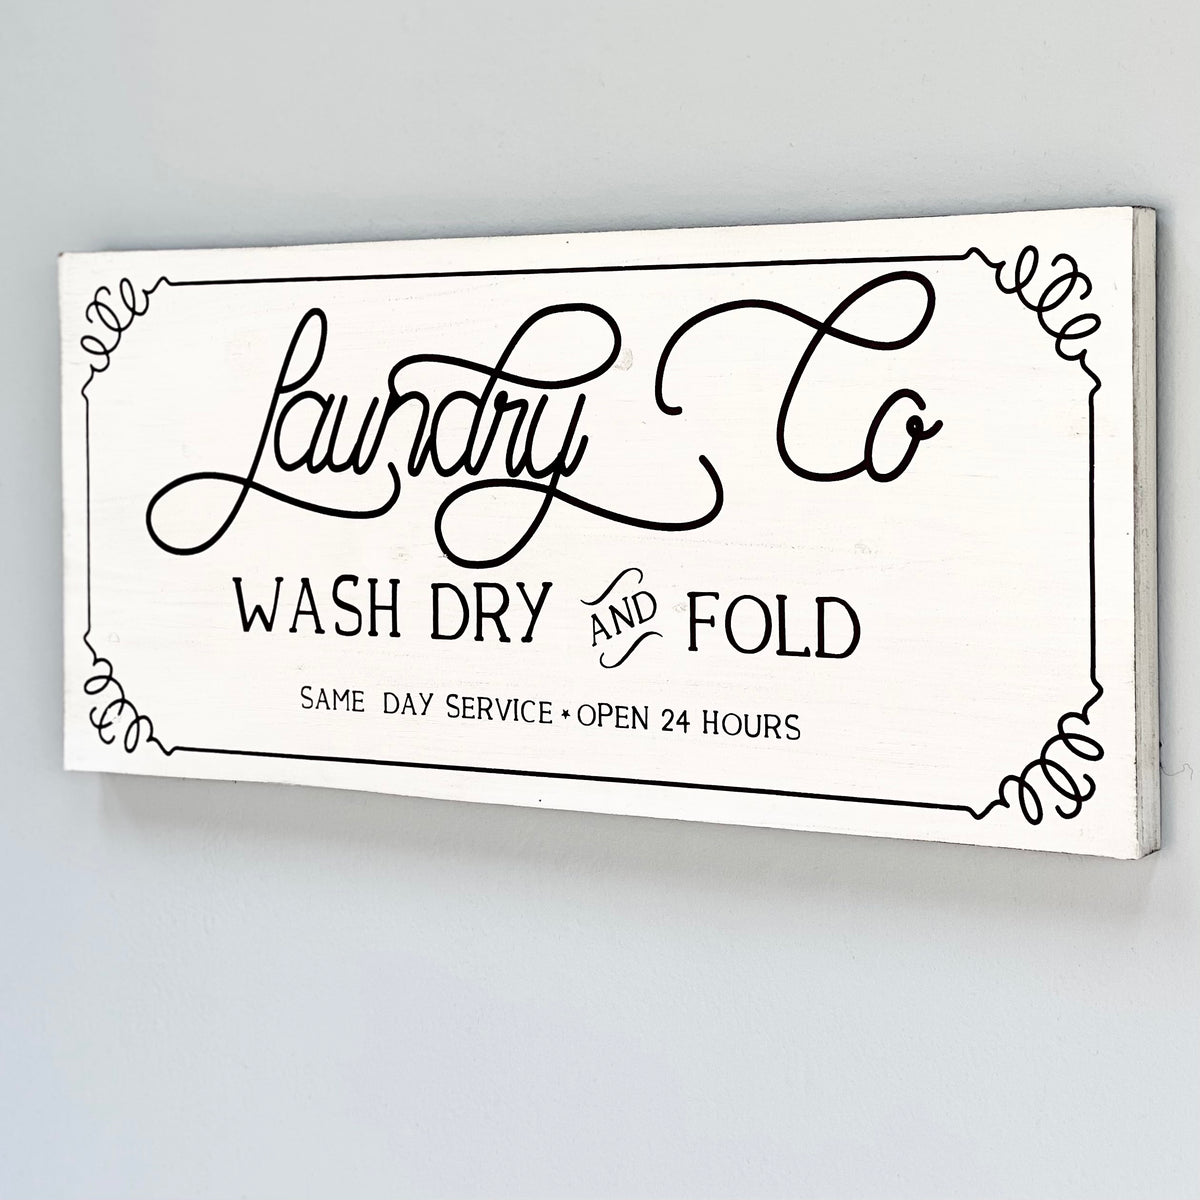 Laundry Co. Wooden White Wall Art